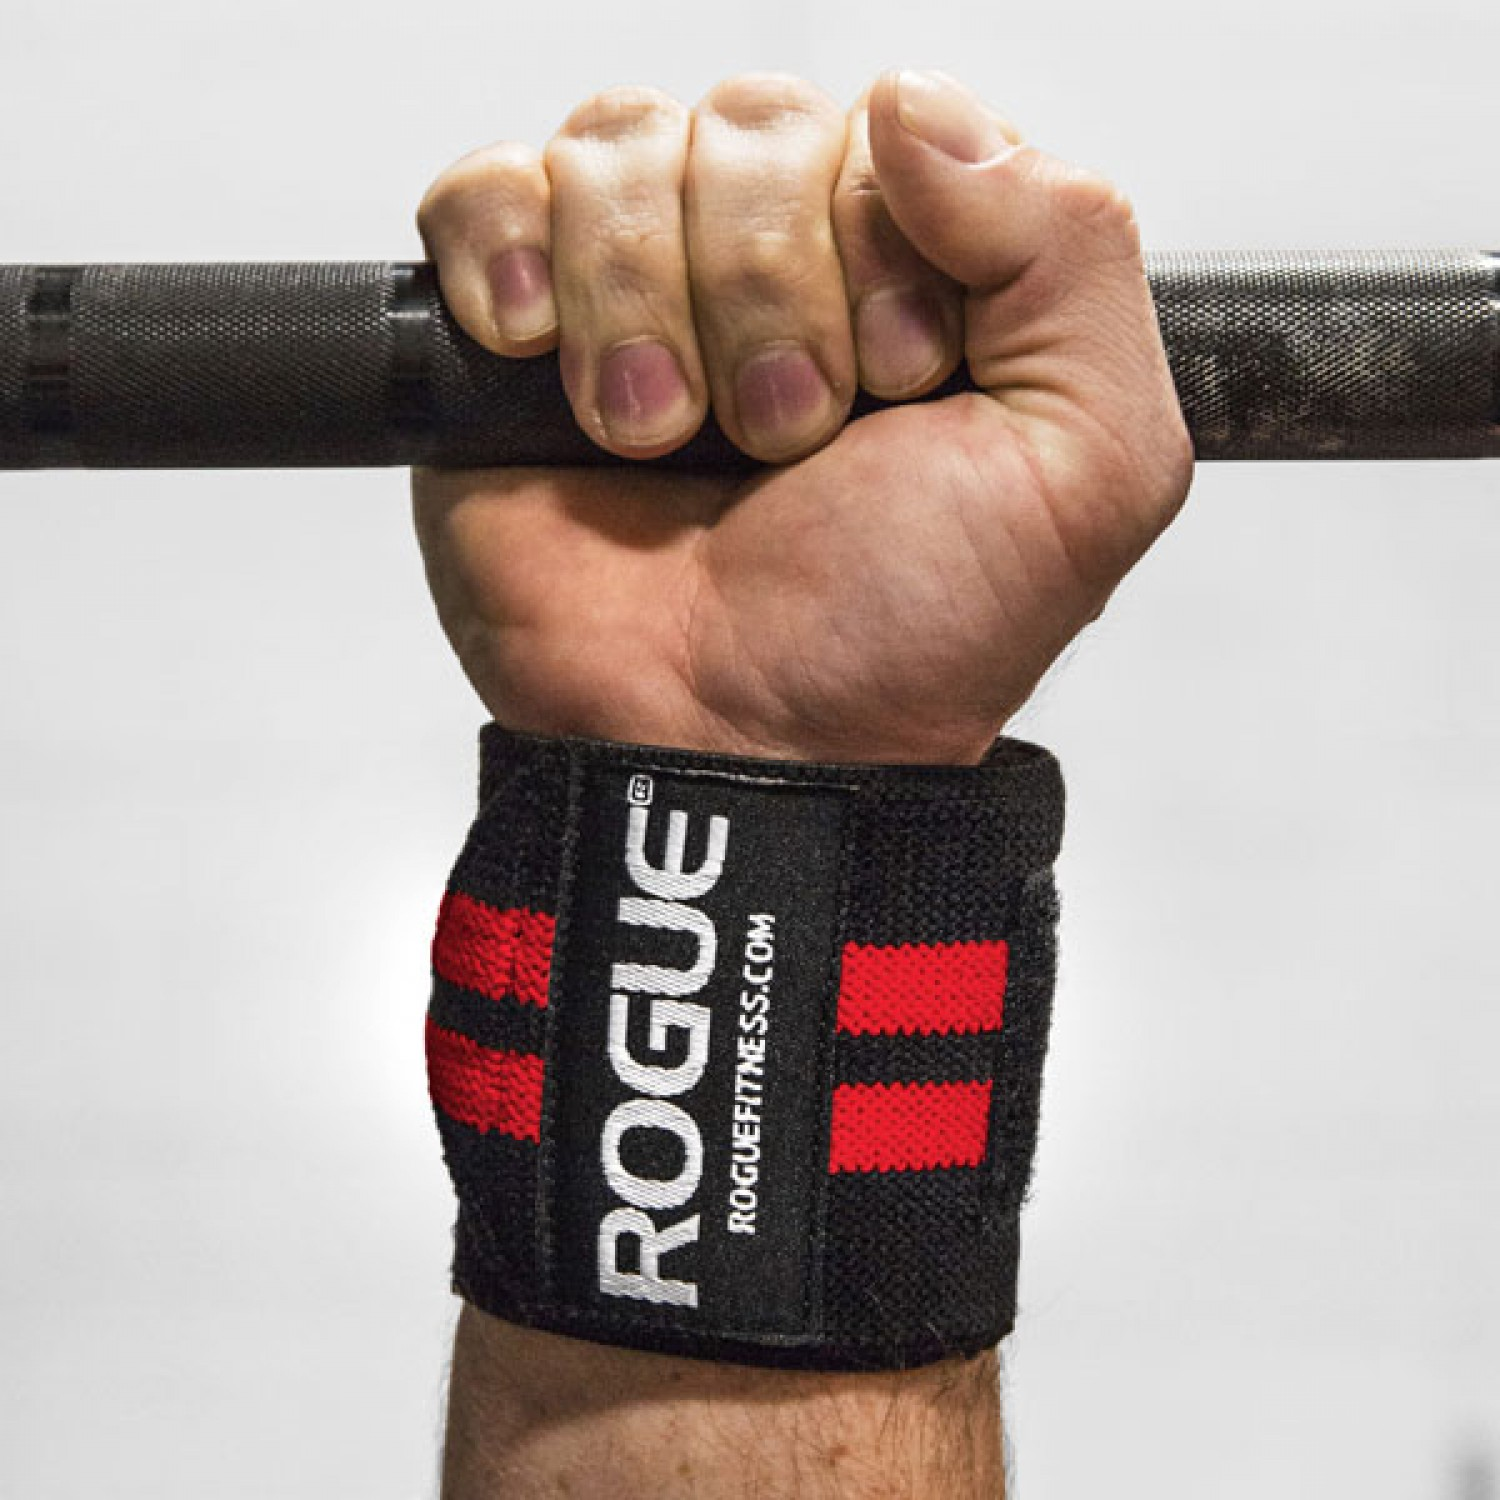 wrist wrap on a person's wrist with hand holding a barbell